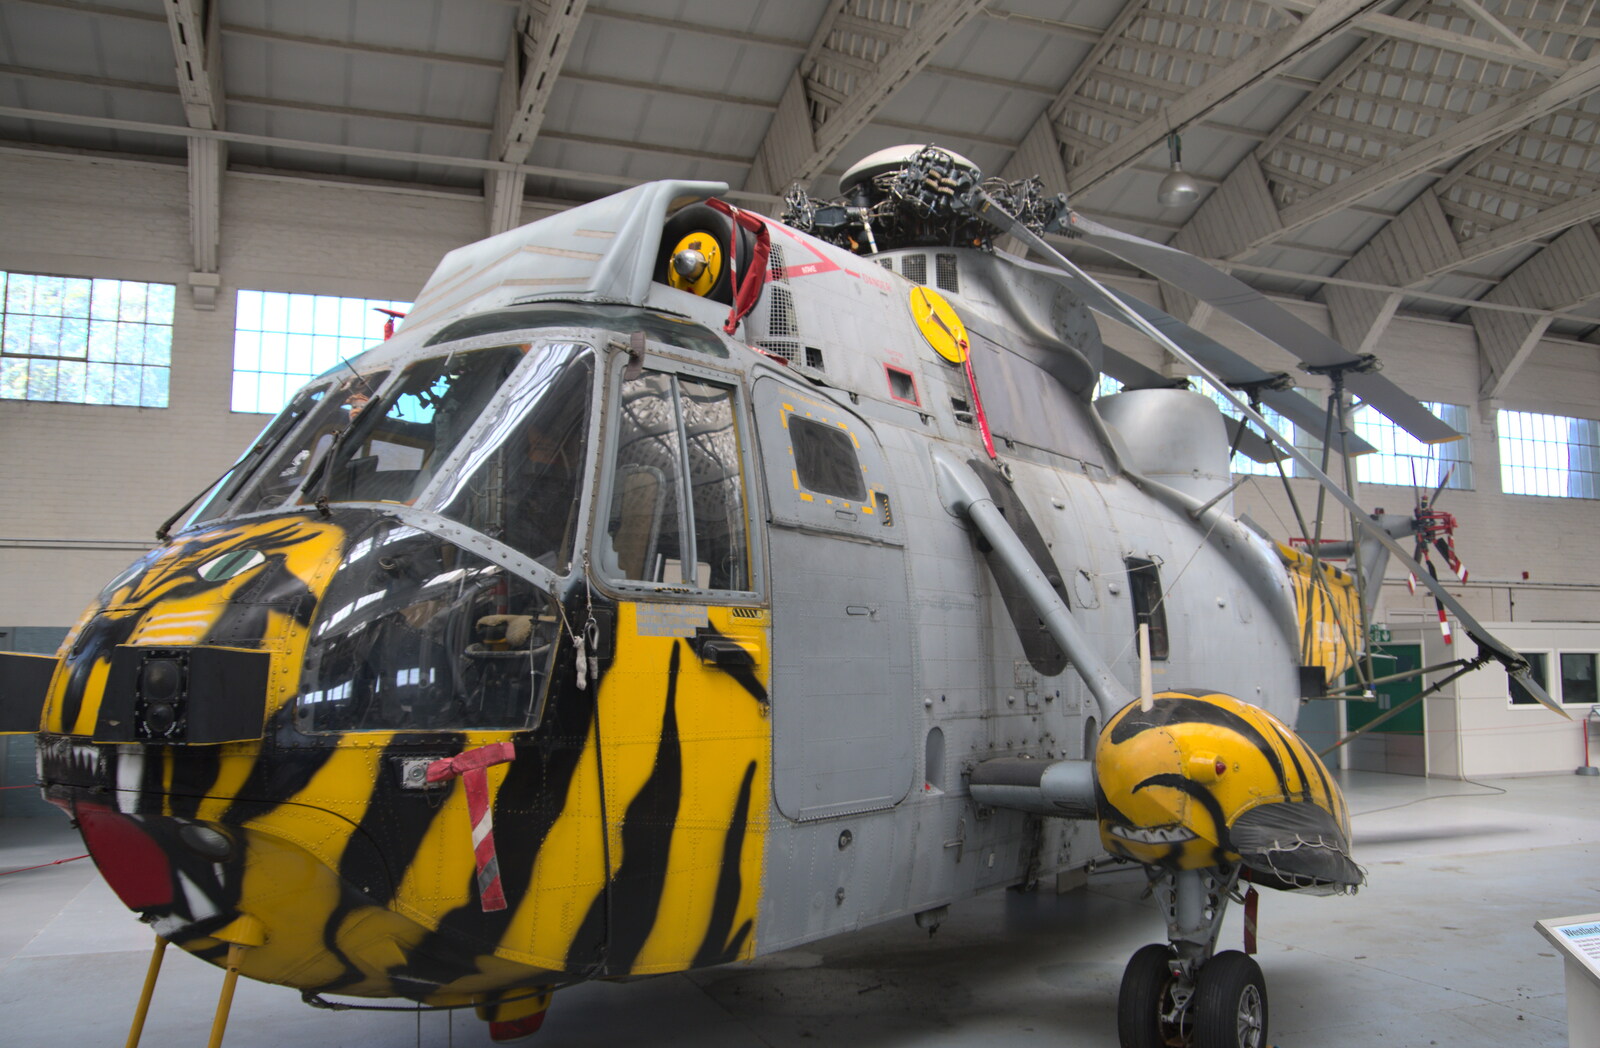 A Sea King helicopter with tiger stripes from The Duxford Dash, IWM Duxford, Cambridge - 13th September 2020